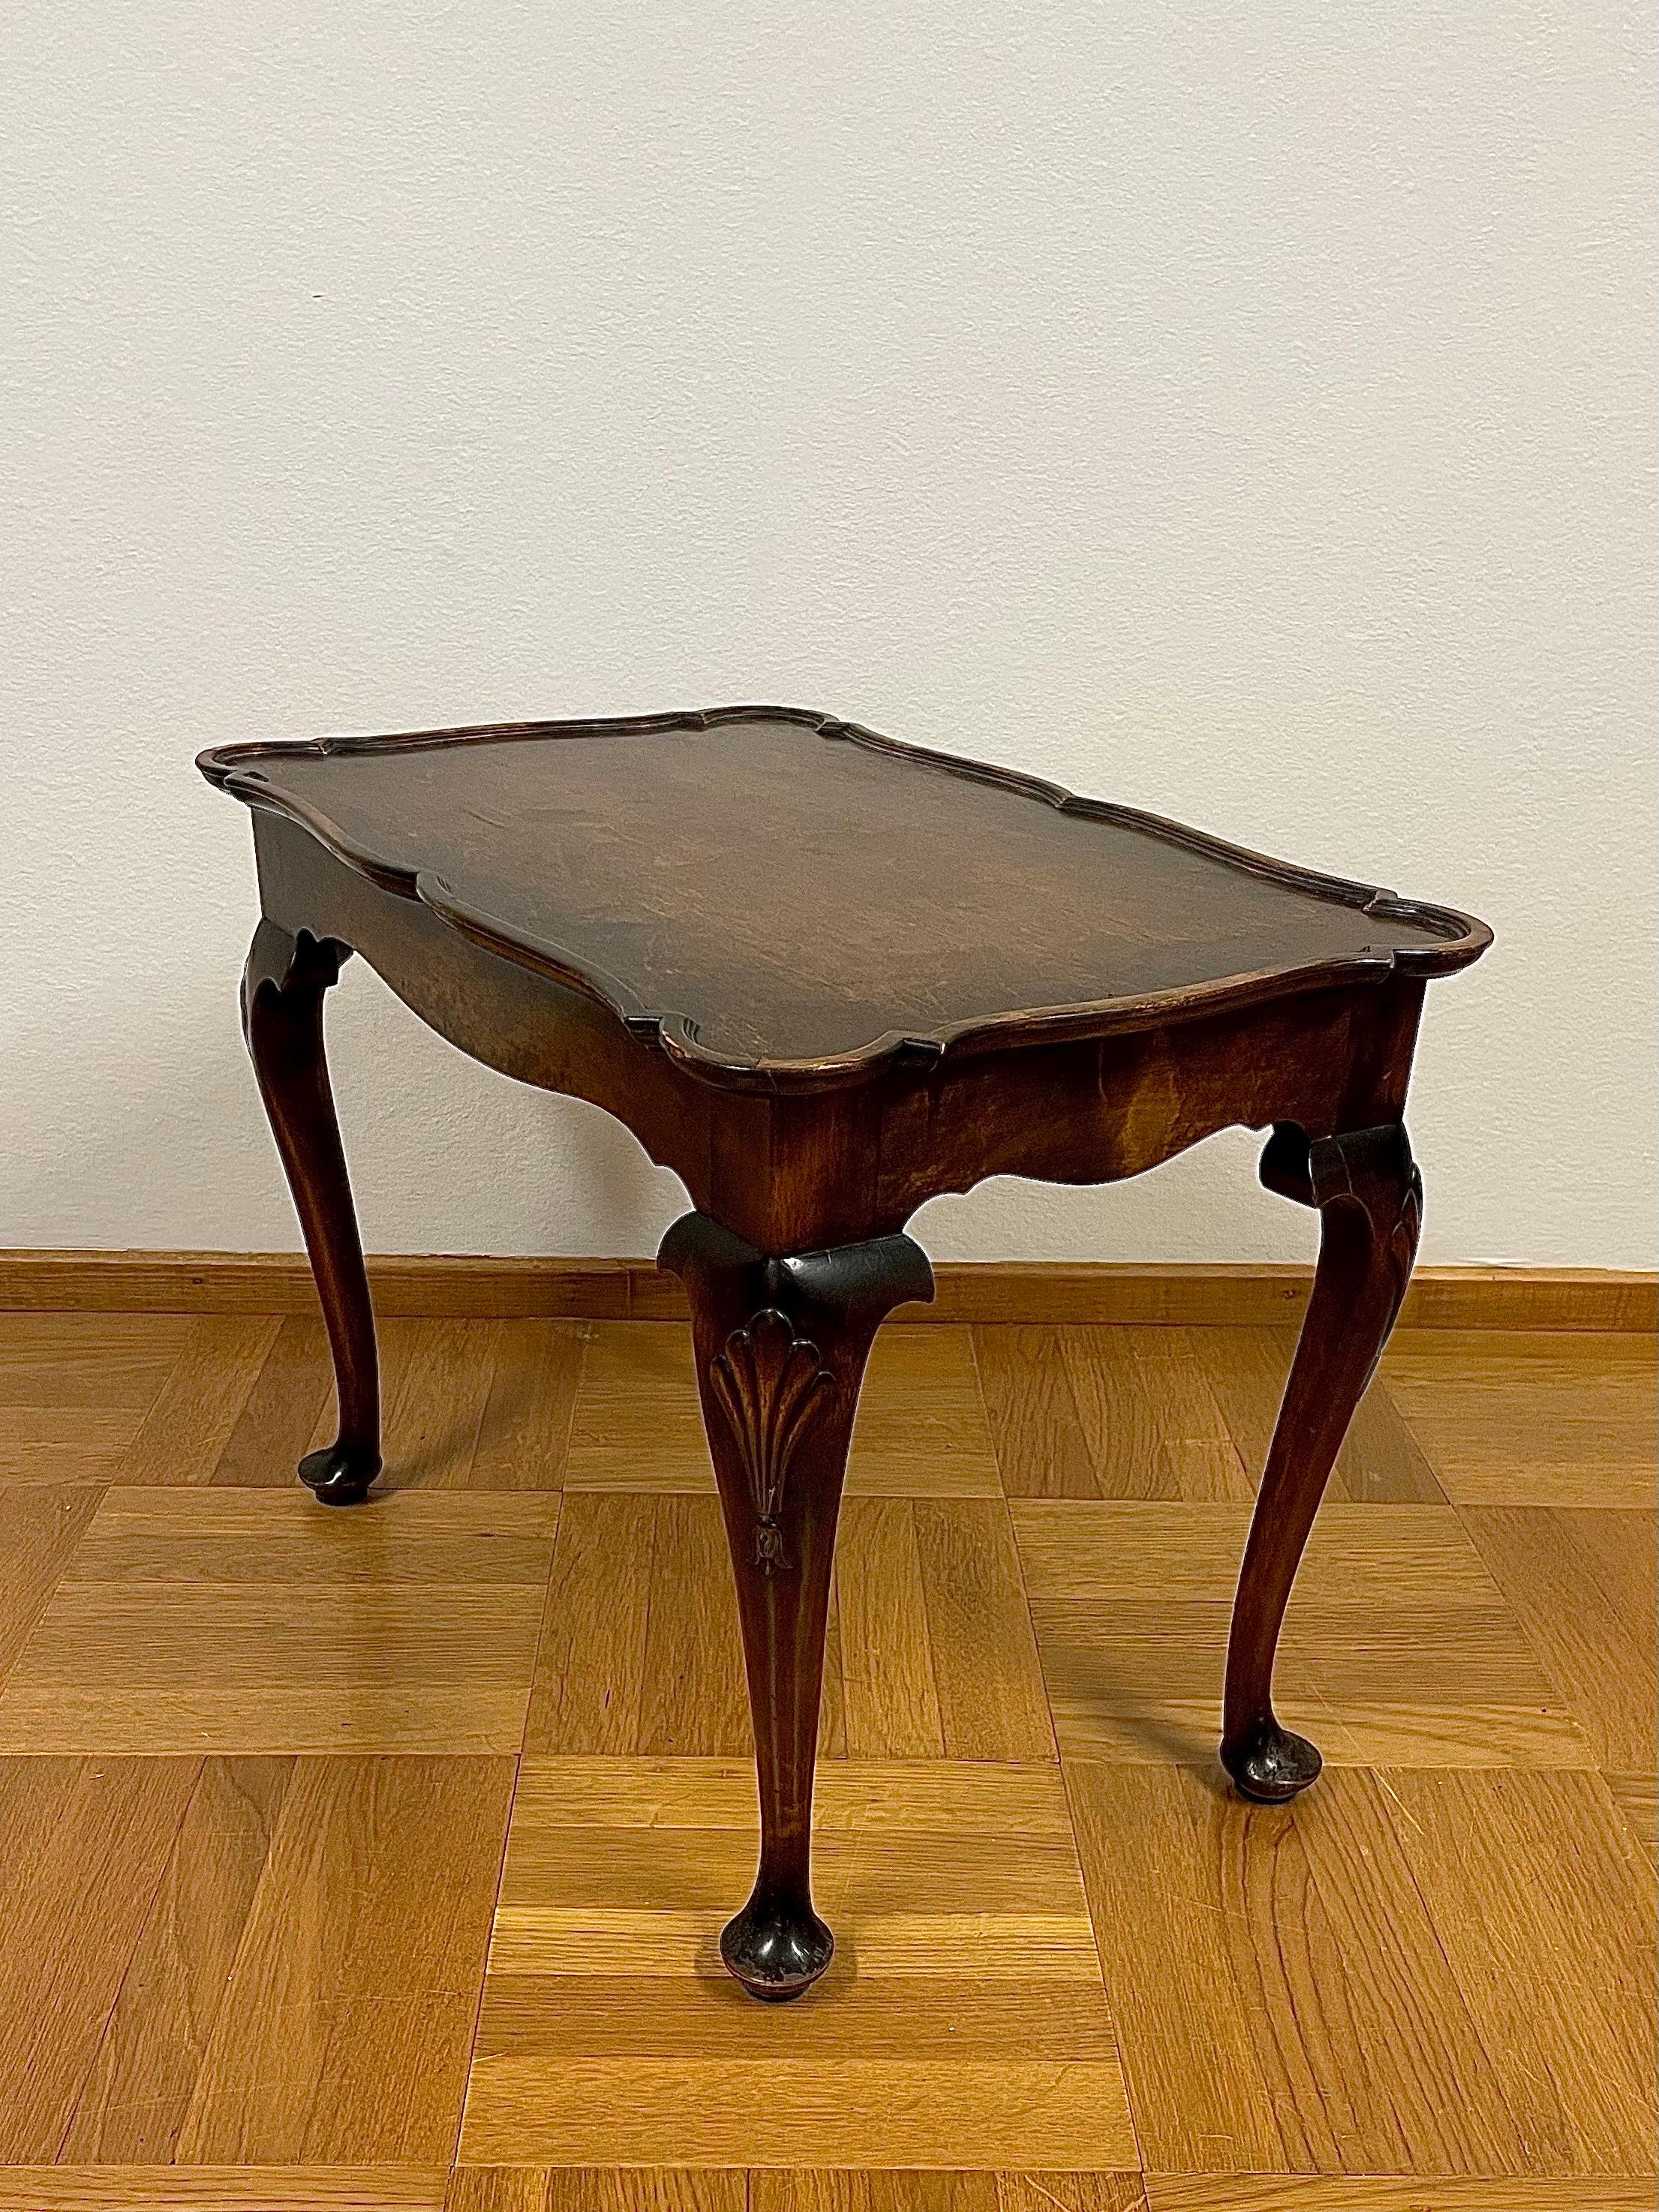 Swedish Tray Table in Stained Birch Manufactured 13/3 1929 by Nordiska Kompaniet For Sale 1